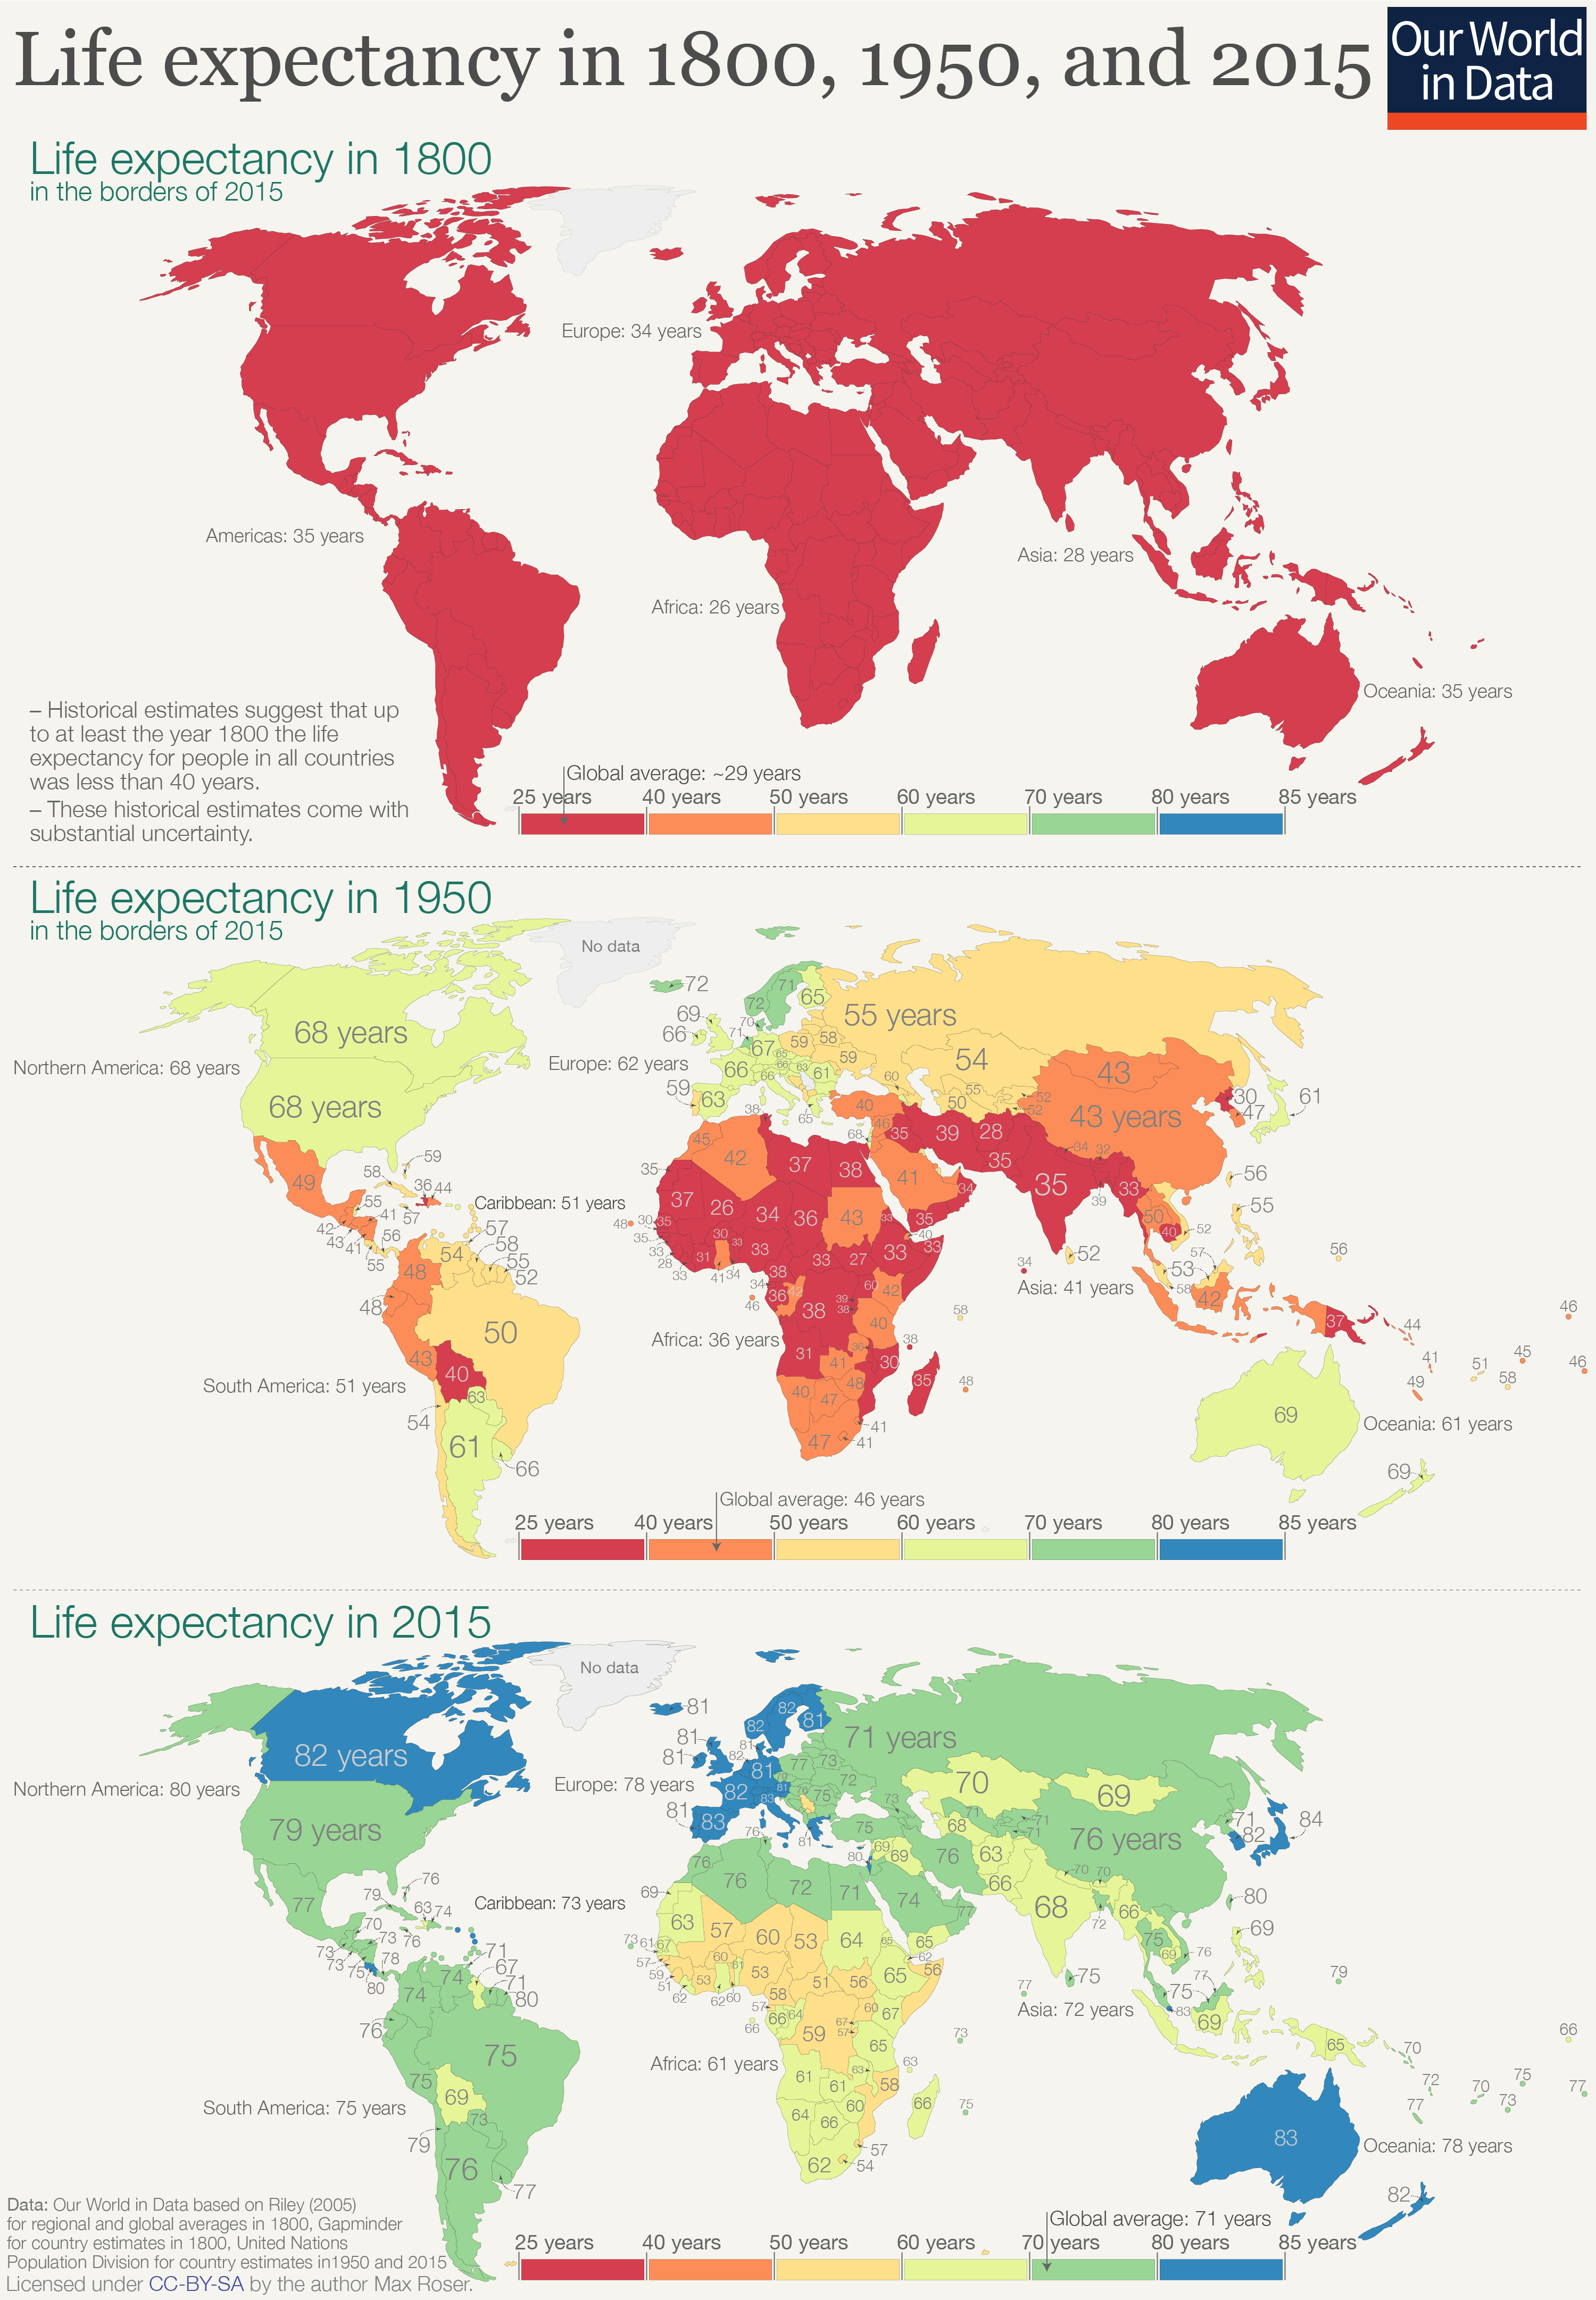 https://ourworldindata.org/wp-content/uploads/2018/10/3-World-maps-of-Life-expectancy.png